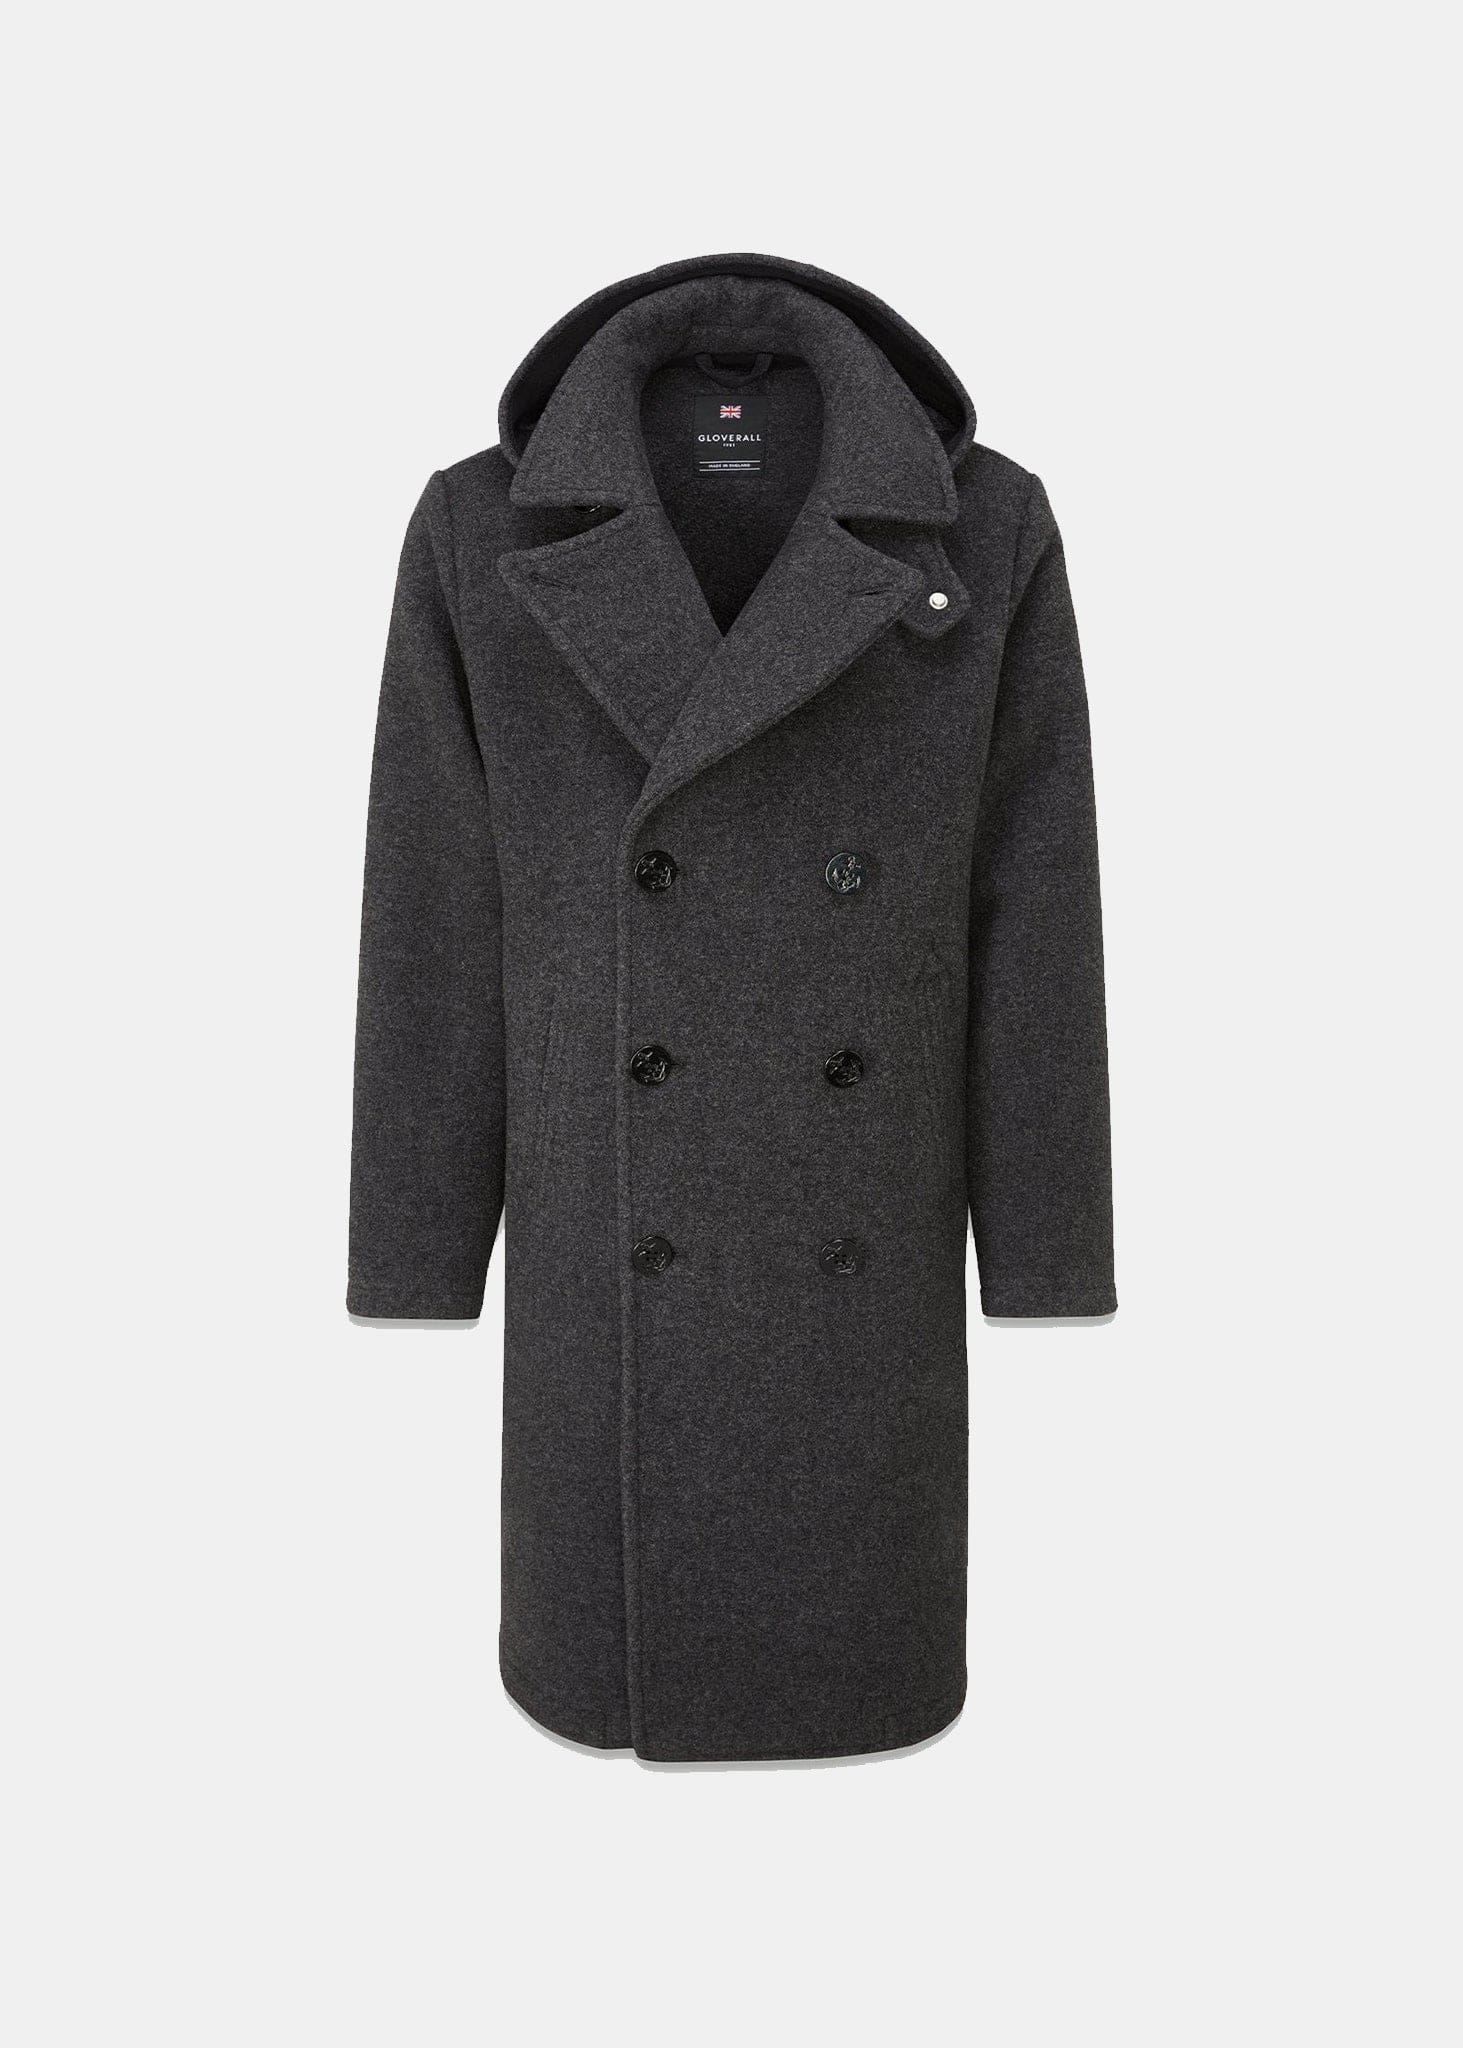 Shackleton Peacoat Charcoal – Gloverall